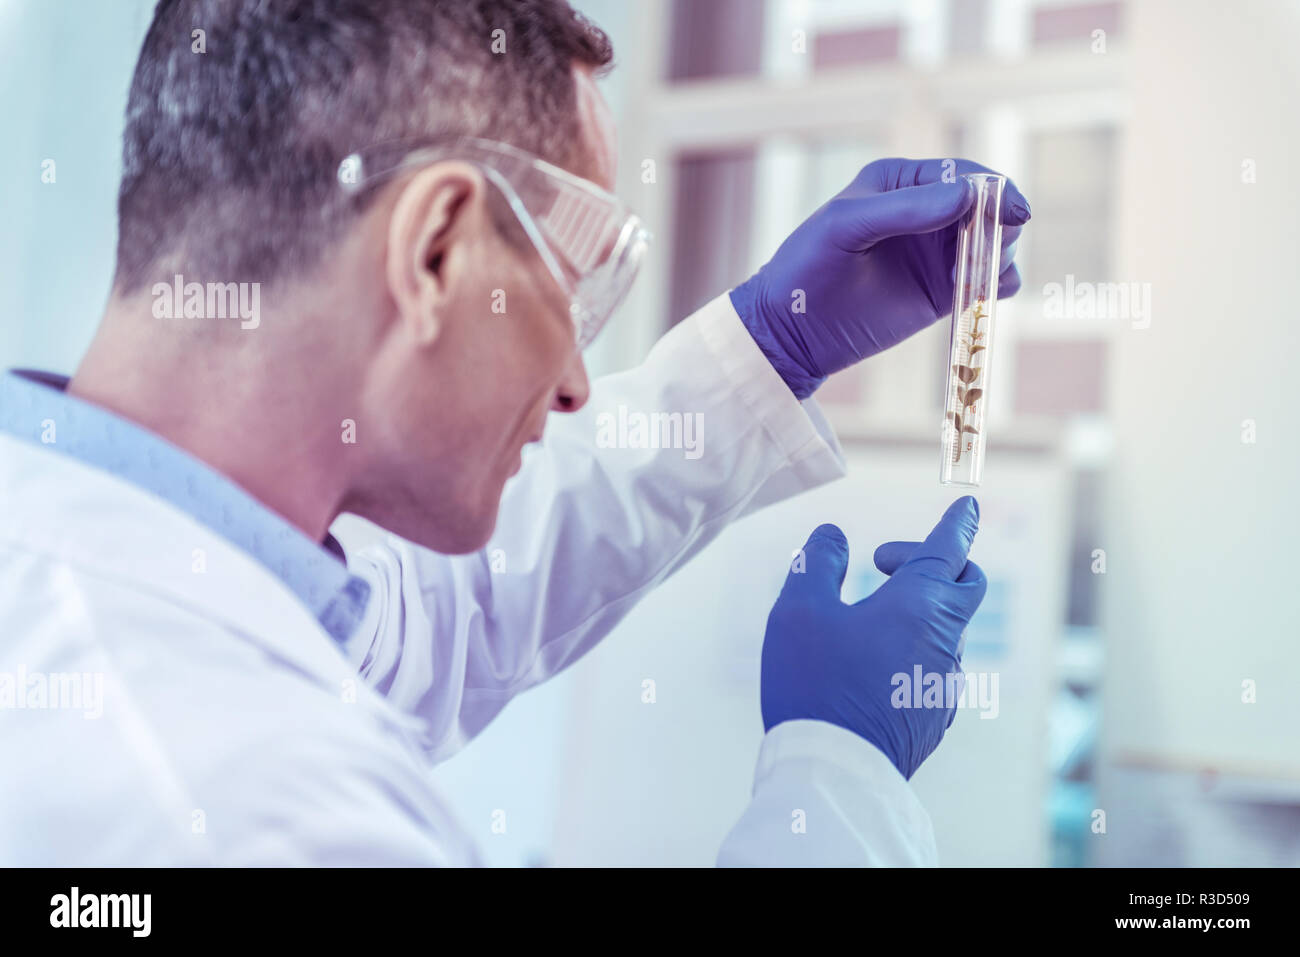 That is great. Cheerful young man being well-equipped while working with reagents Stock Photo